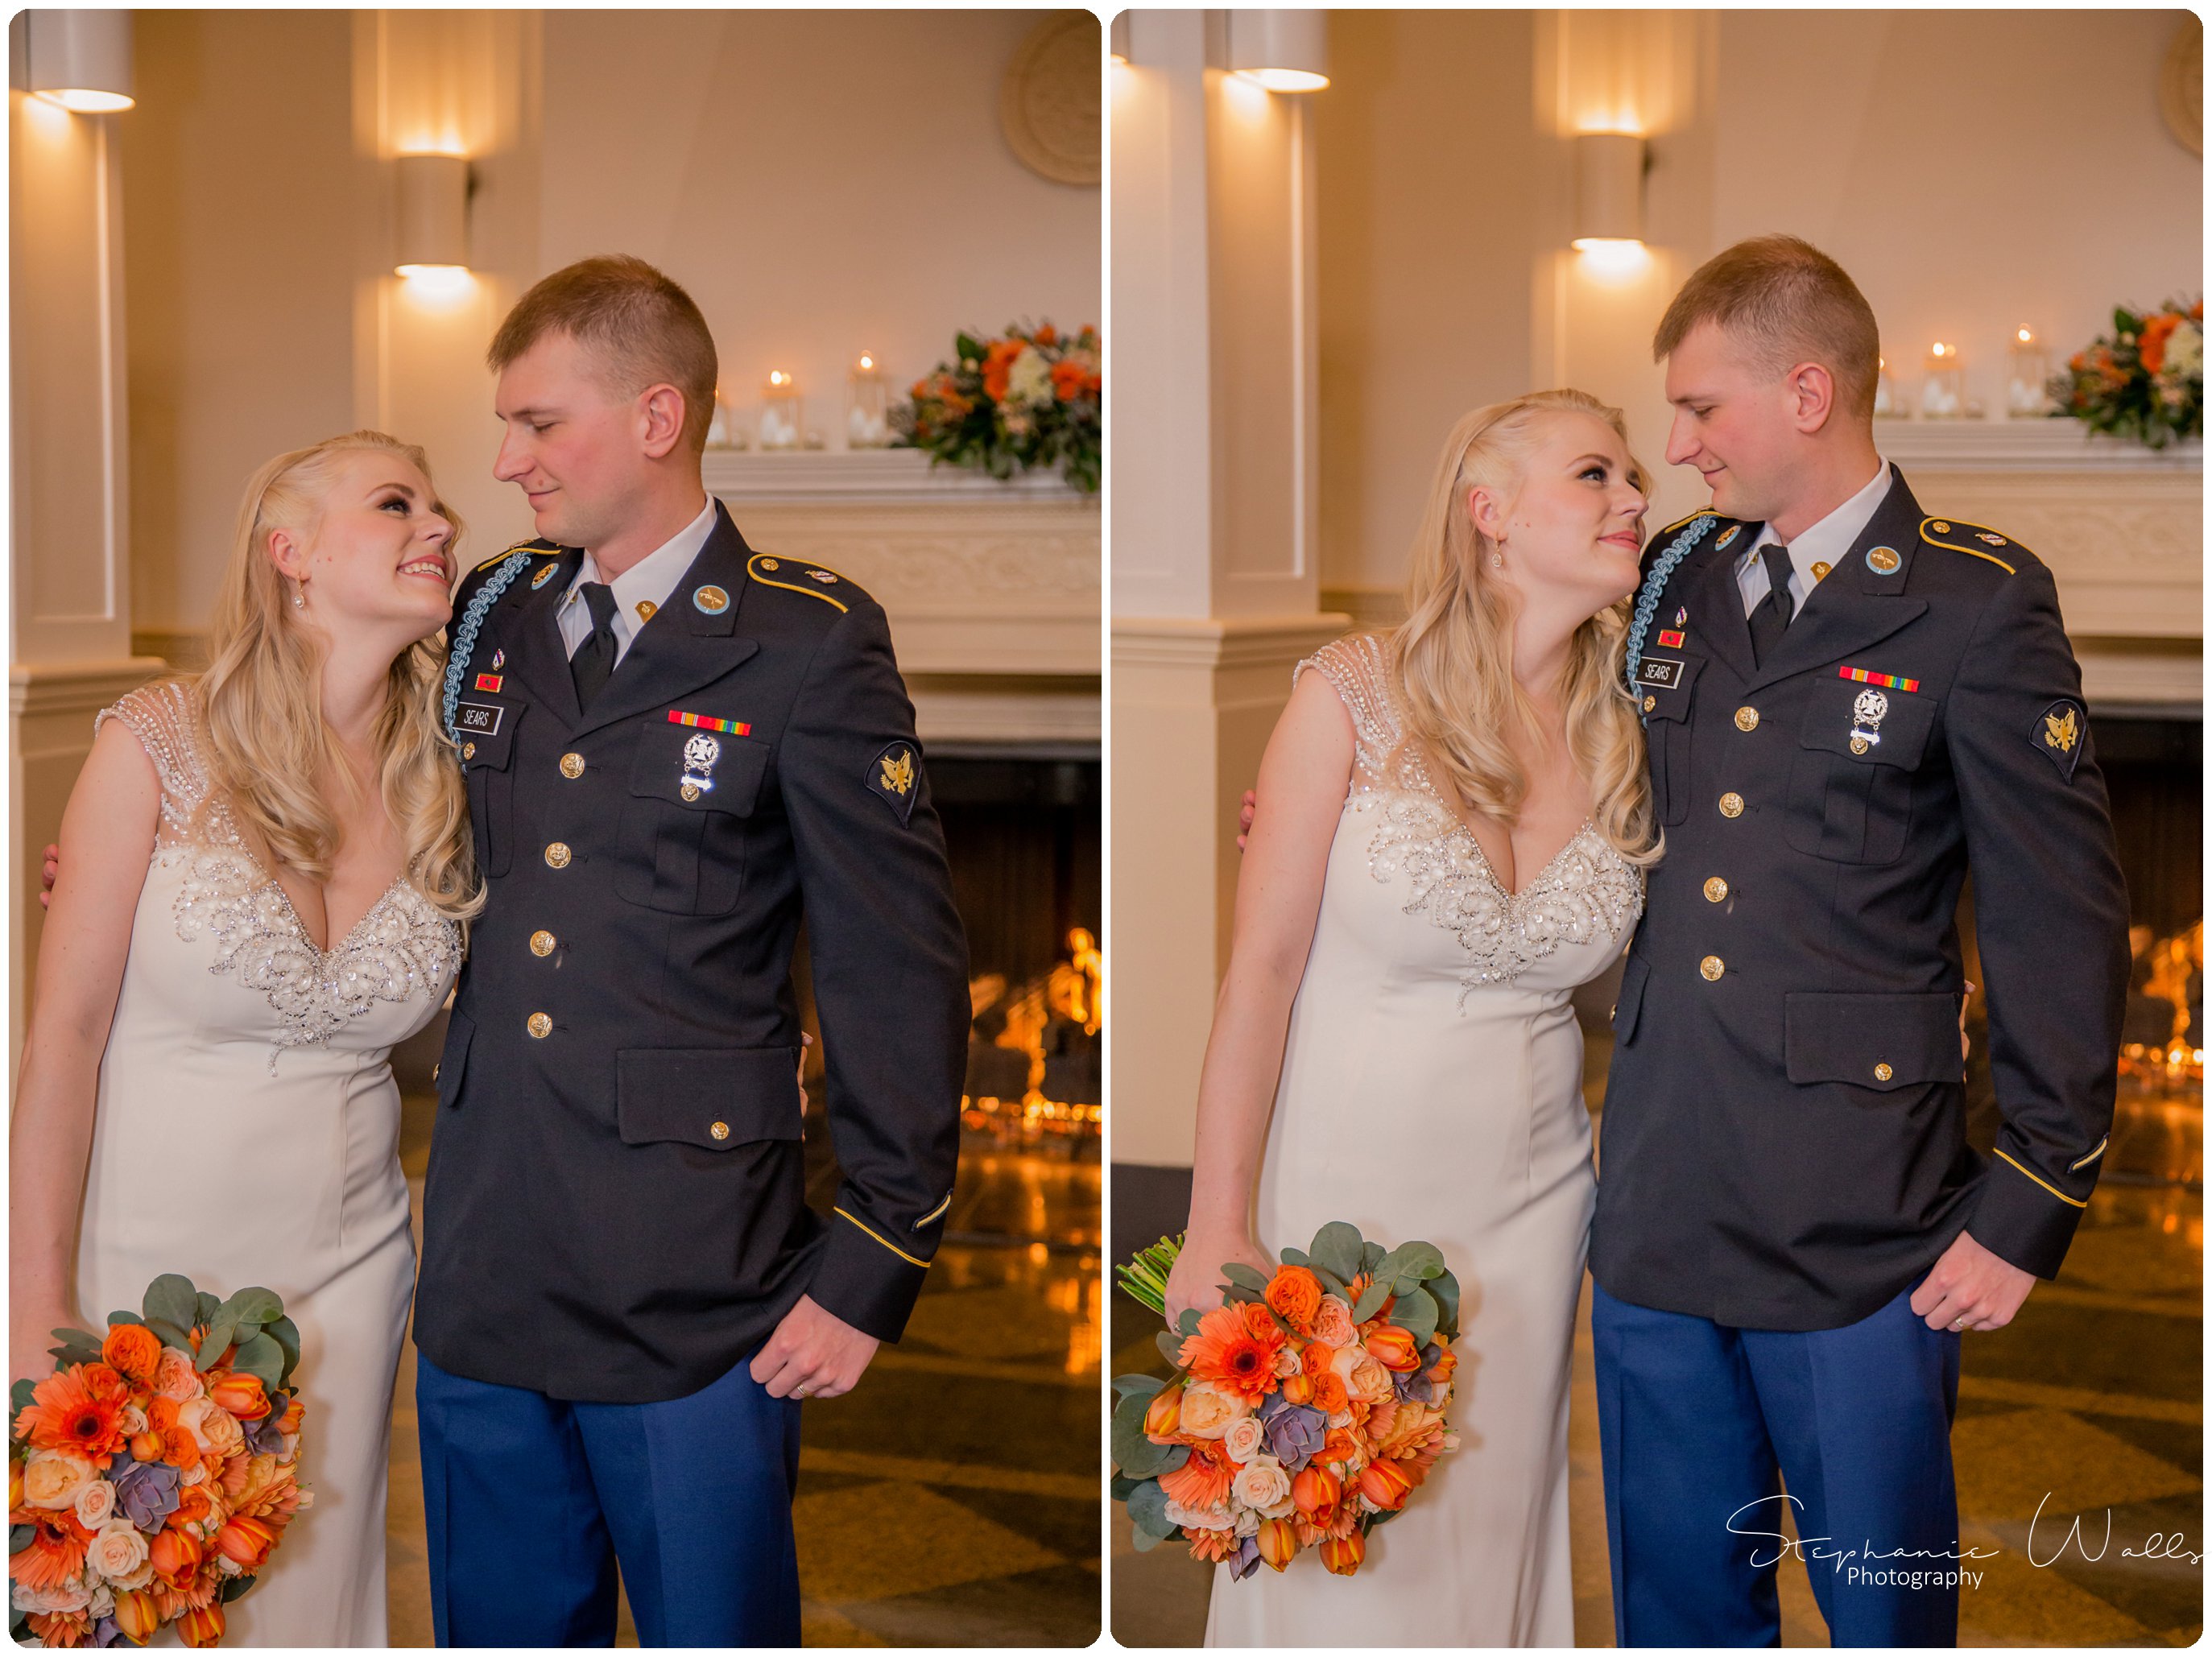 Sears Wedding Party Bridals 039 The Hero & The Starlet | Monte Cristo Ballroom | Stephanie Walls Photography Weddings